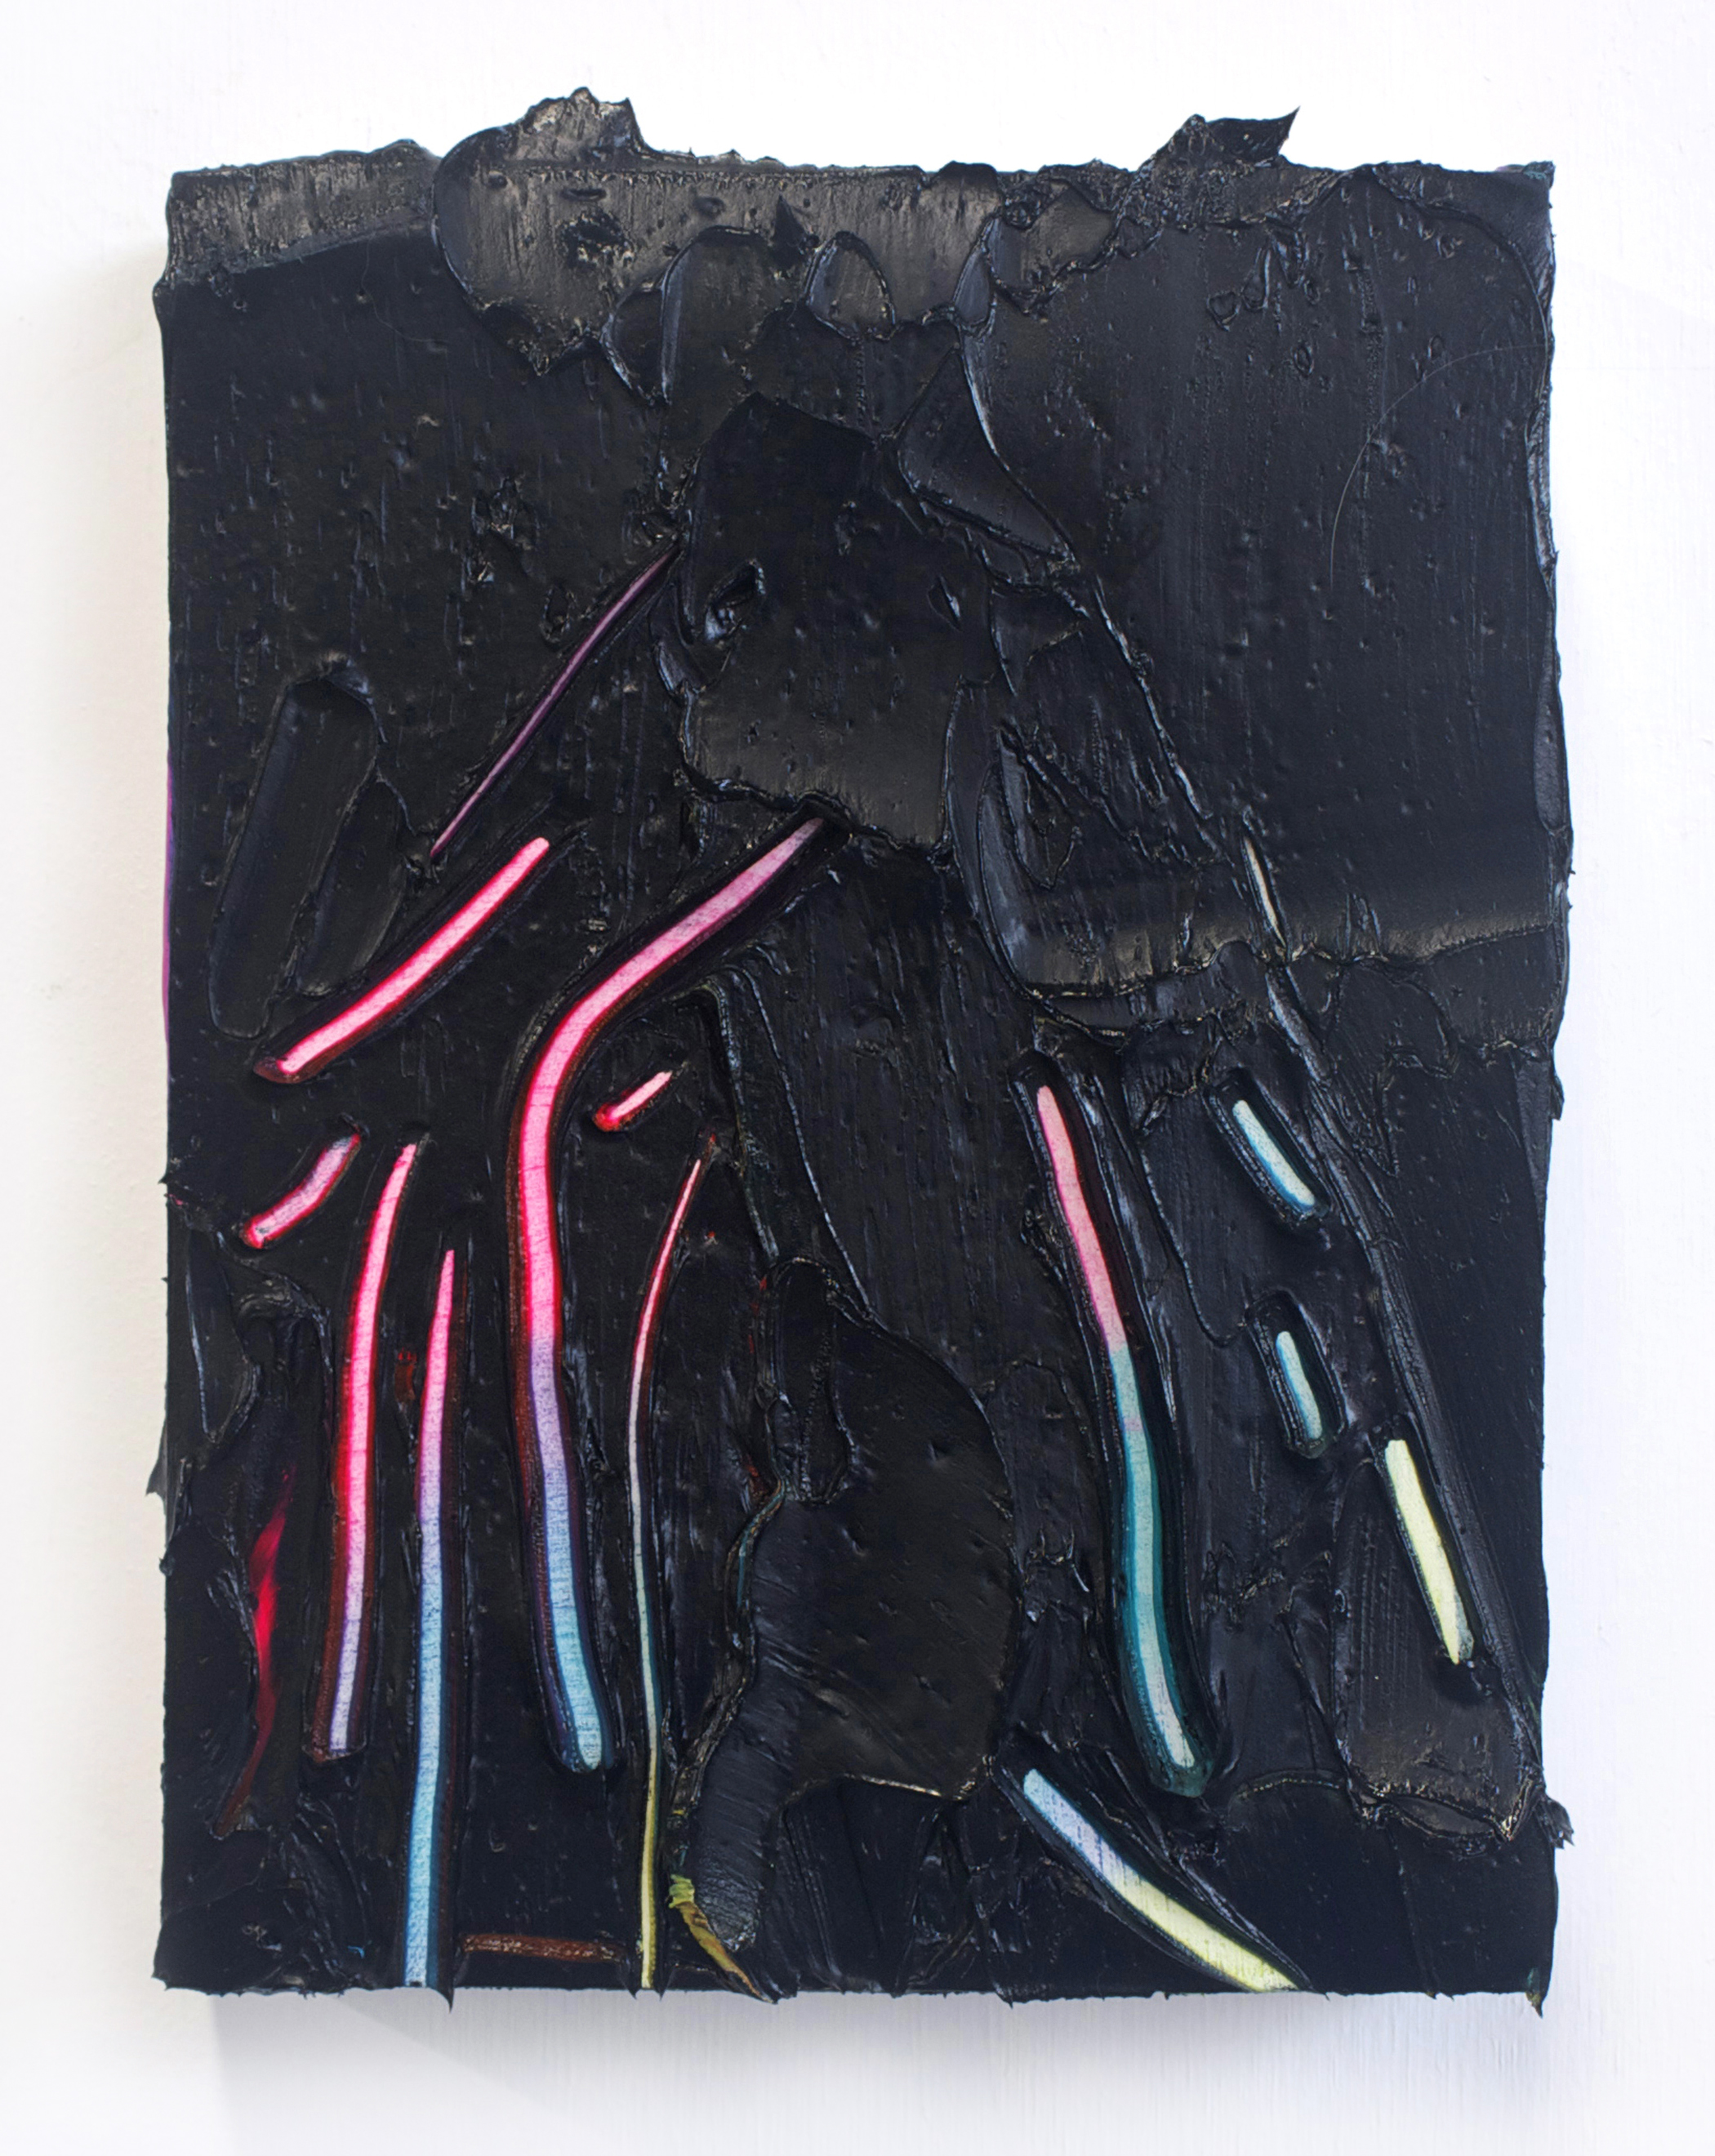 Glowsticks / oil on panel / 8 x 6 inches (sold)